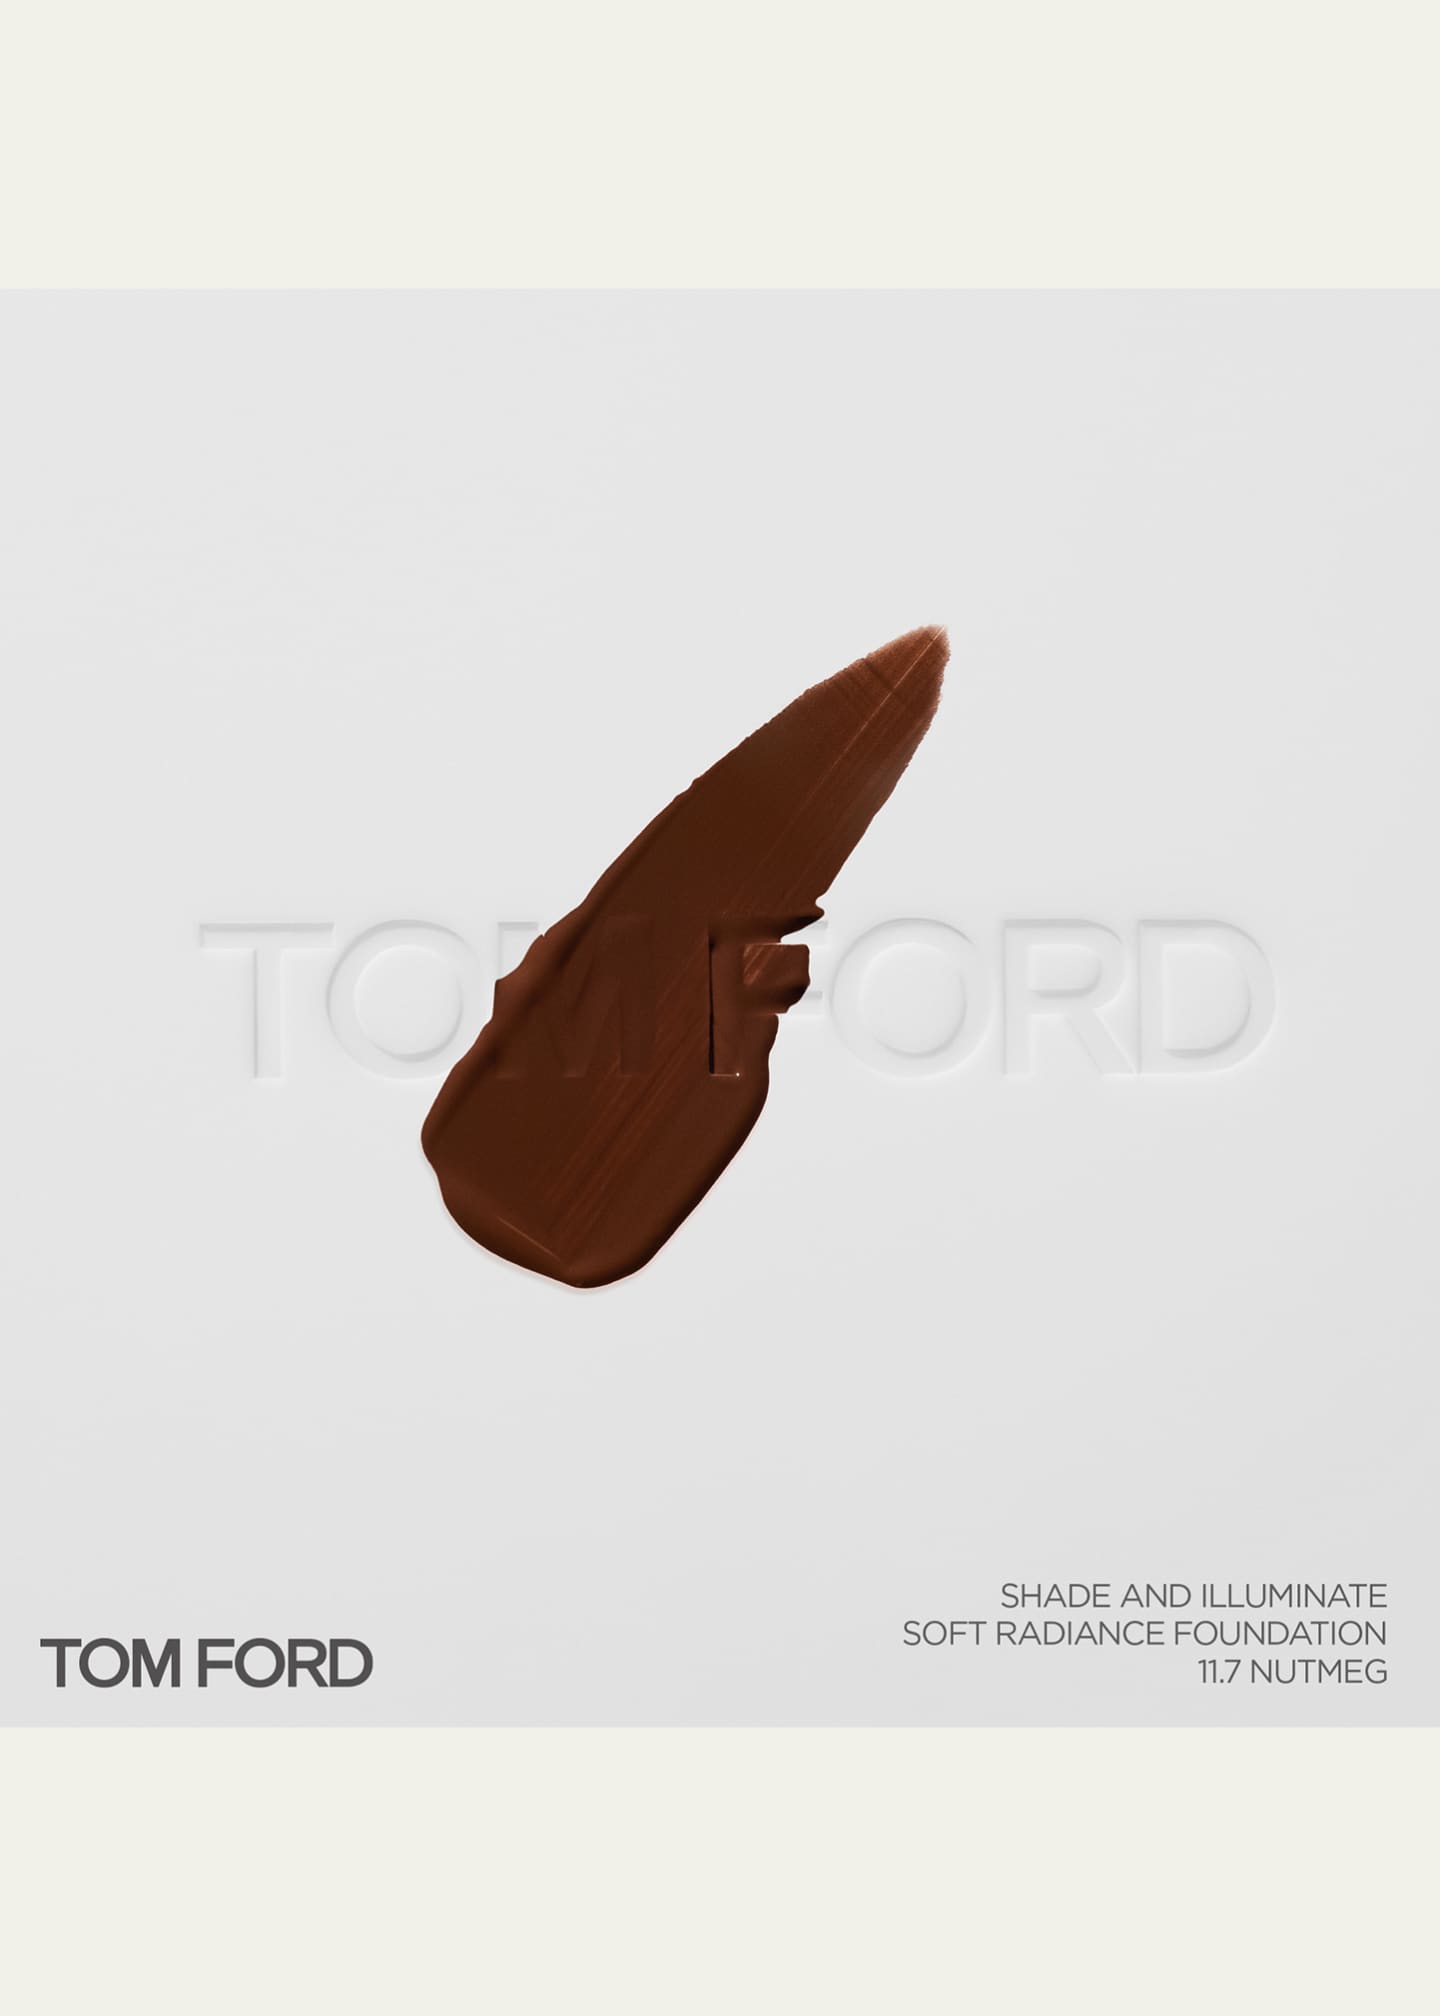 Editor's Pick of the Day: Tom Ford Shade and Illuminate Soft